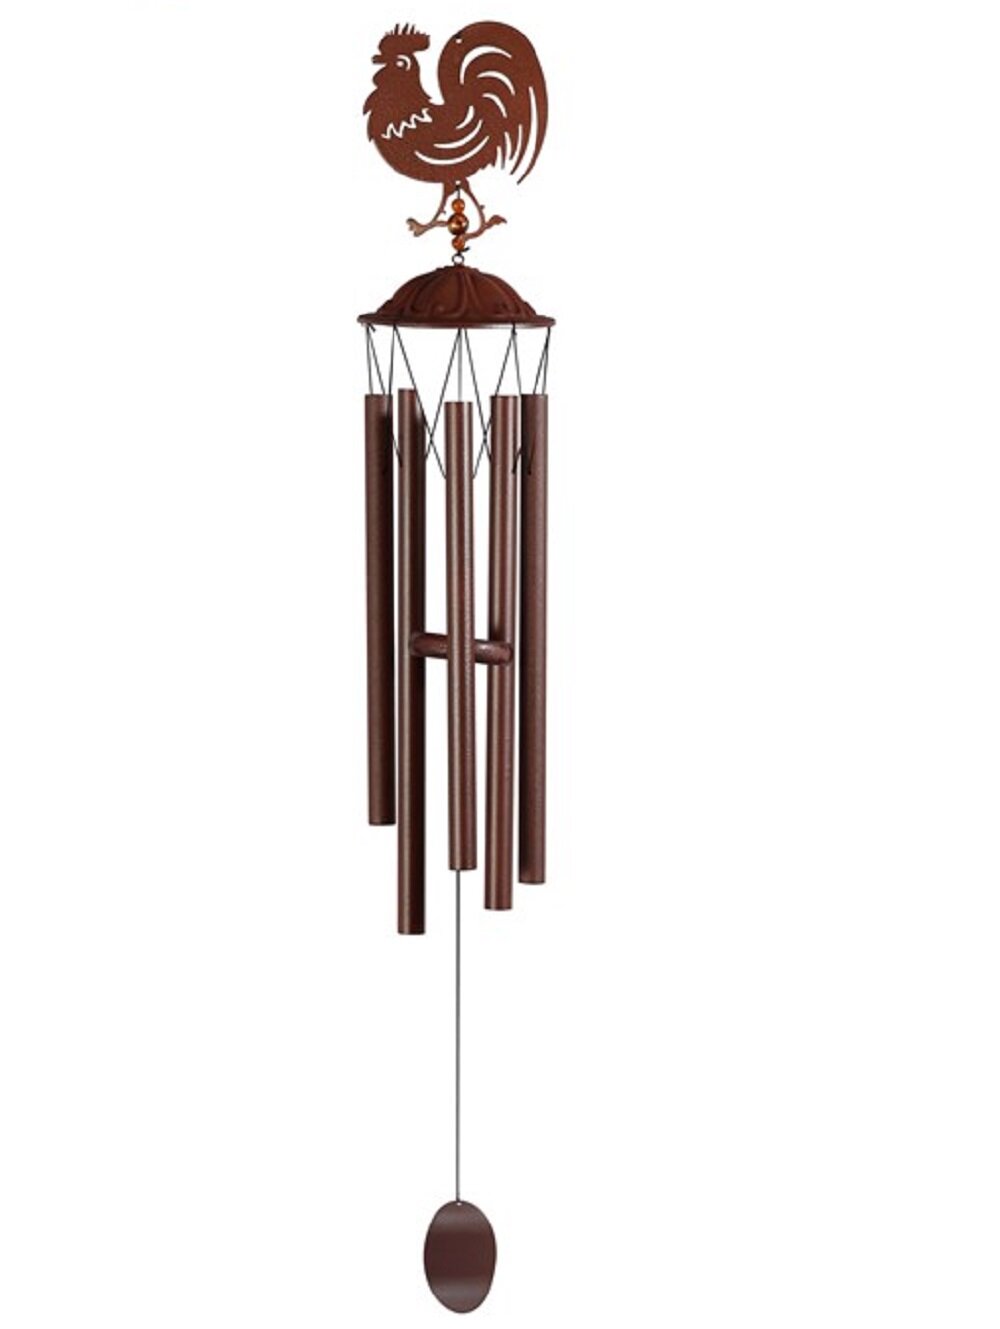 Arlmont & Co. Aeriella Rooster Wind Chime | Wayfair